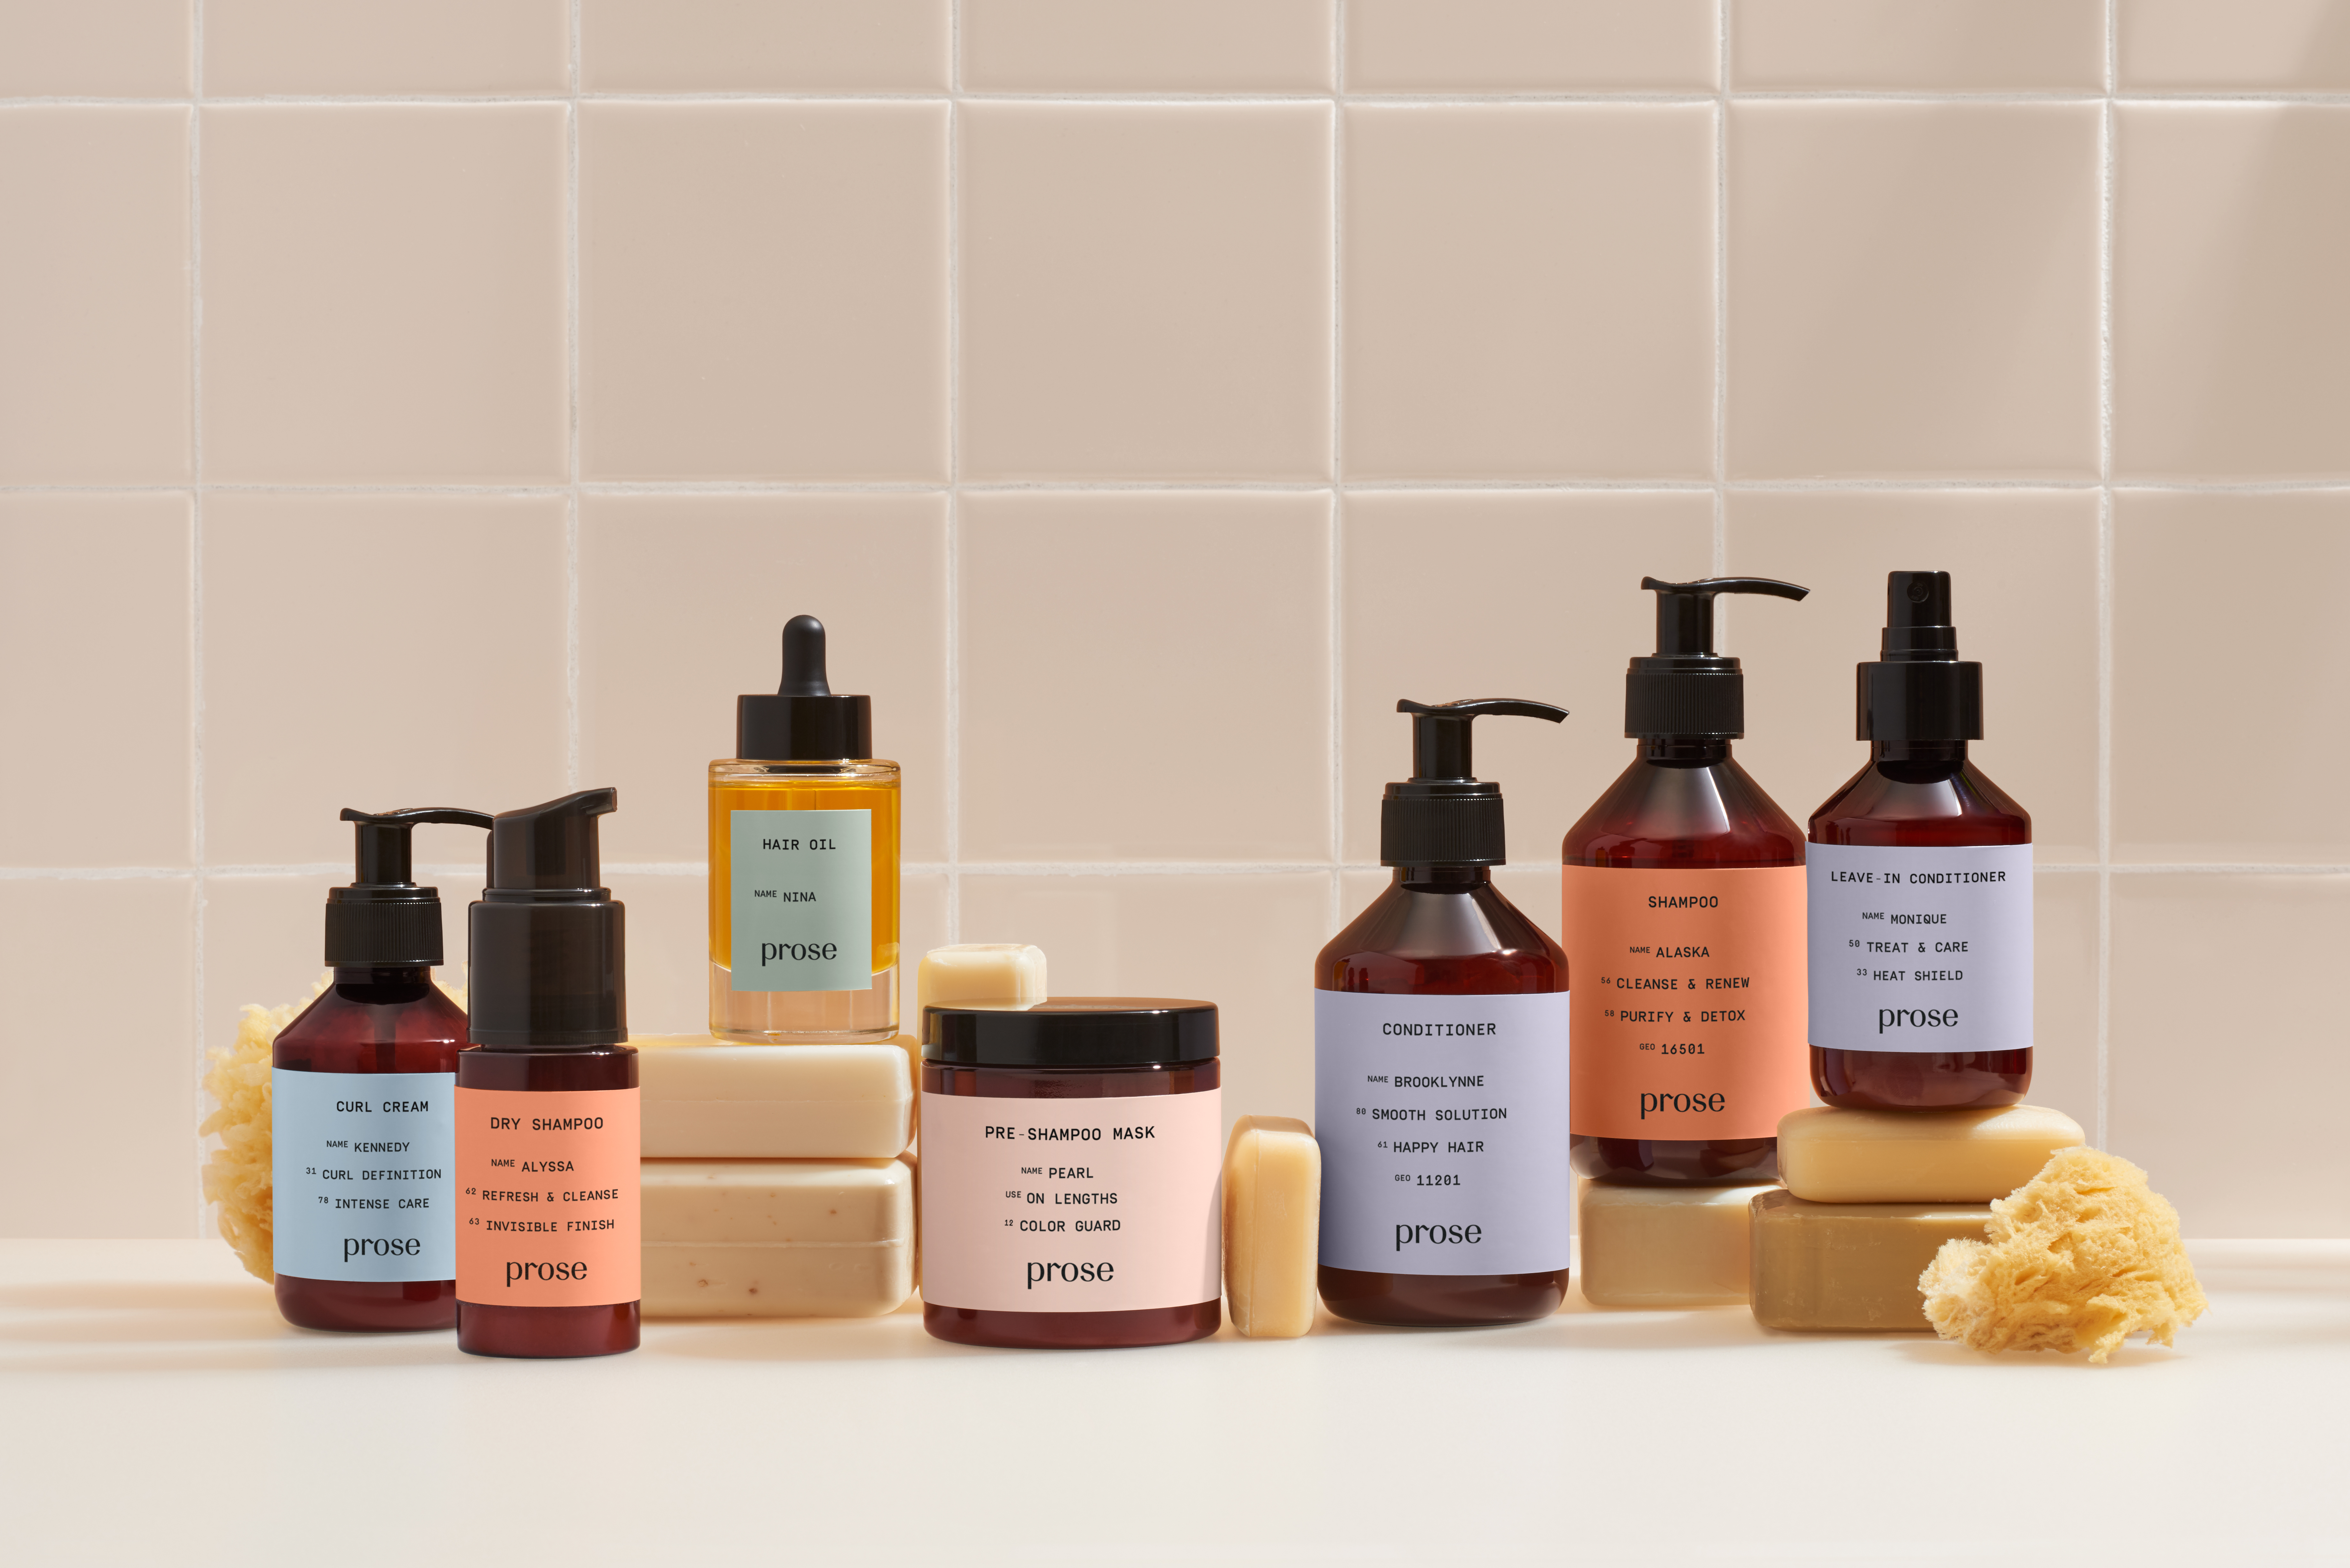 lineup of all prose products against a tan bathroom background